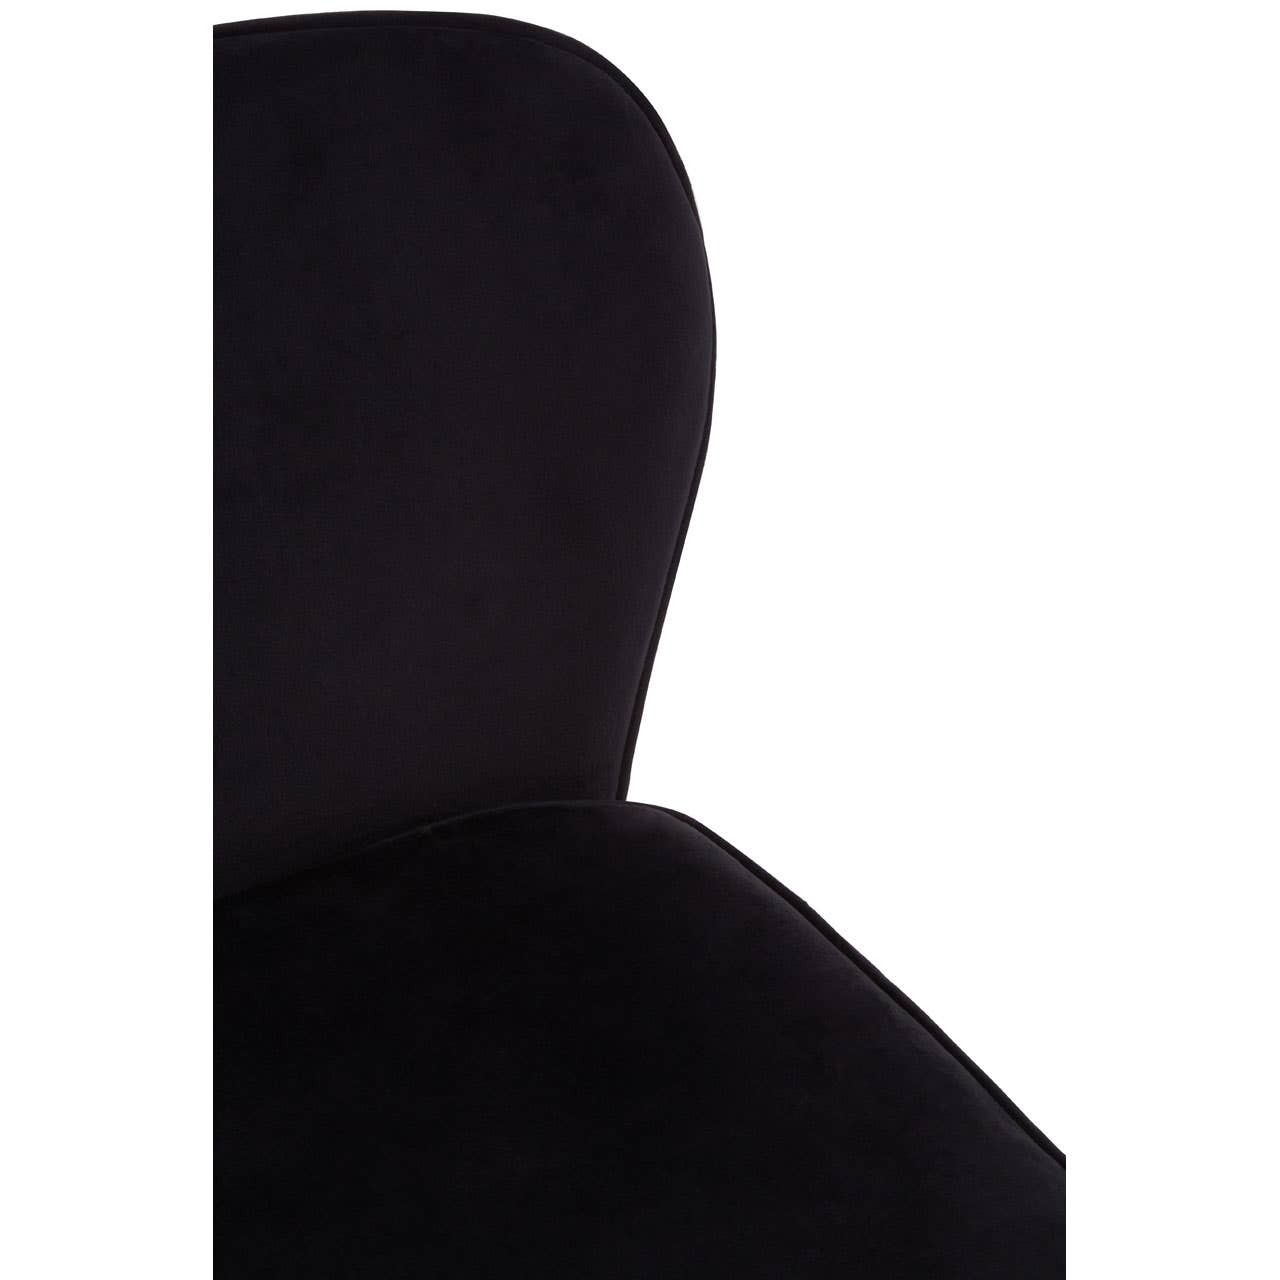 Noosa & Co. Dining Tamzin Curved Black Chrome Finish Dining Chair House of Isabella UK